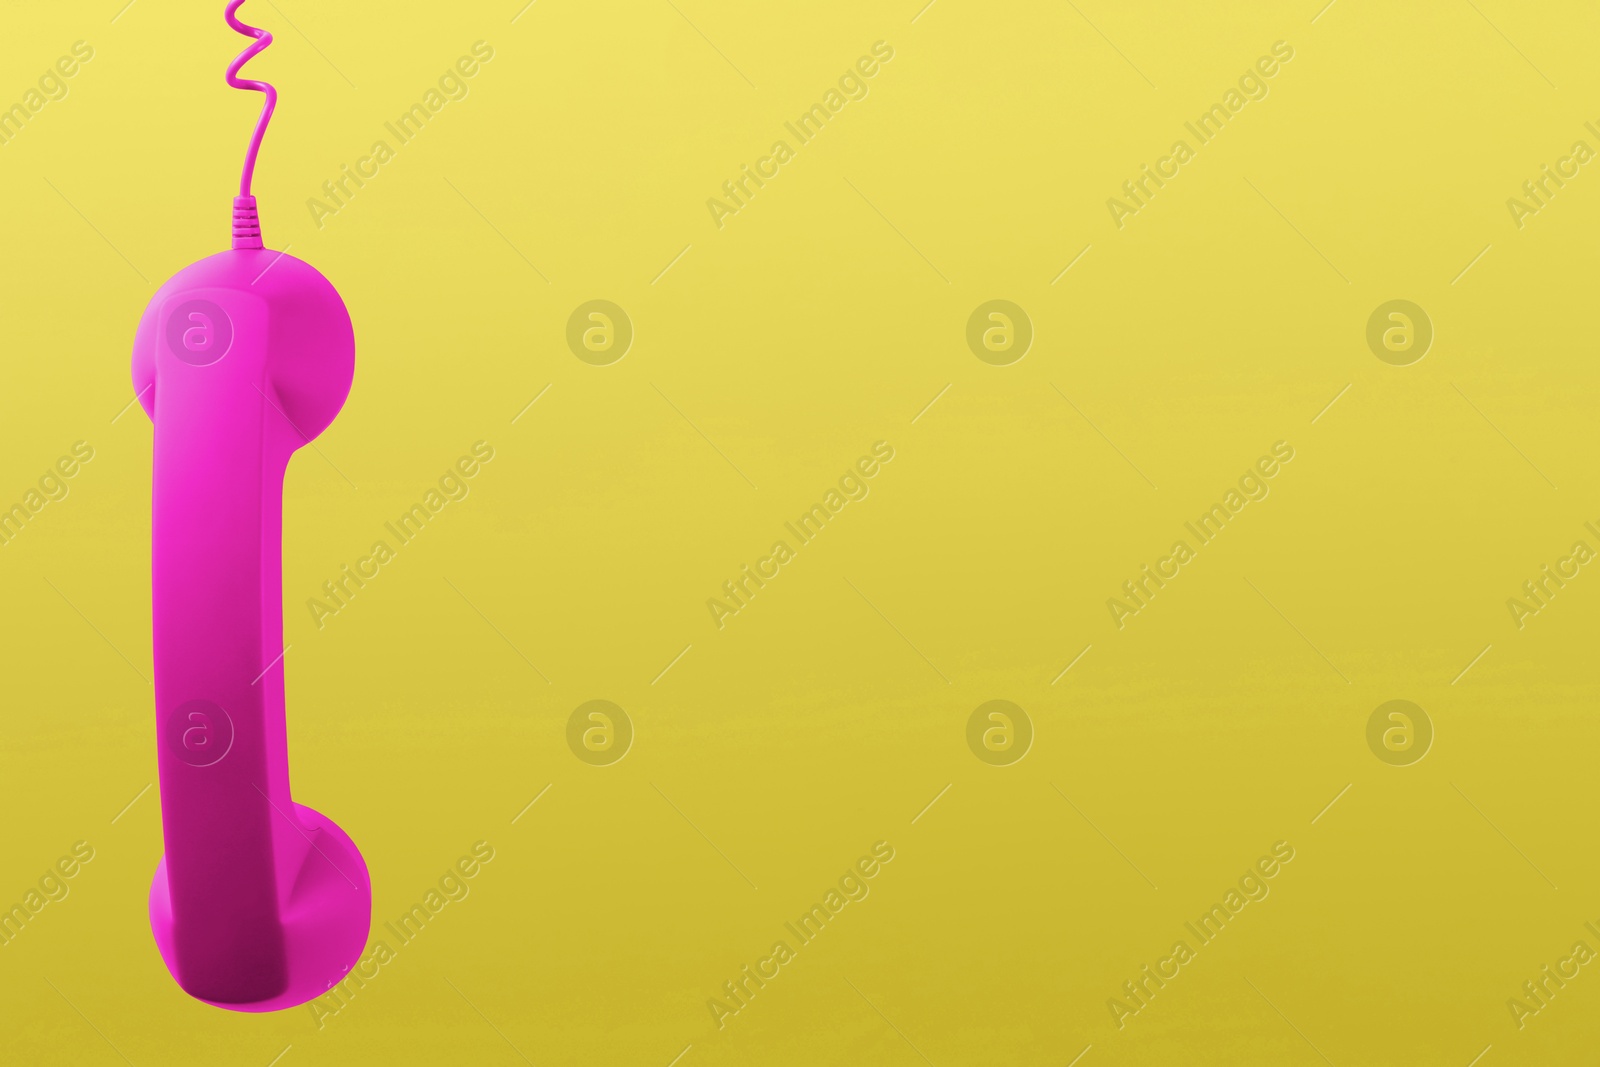 Image of Magenta telephone handset hanging on yellow background. Space for text